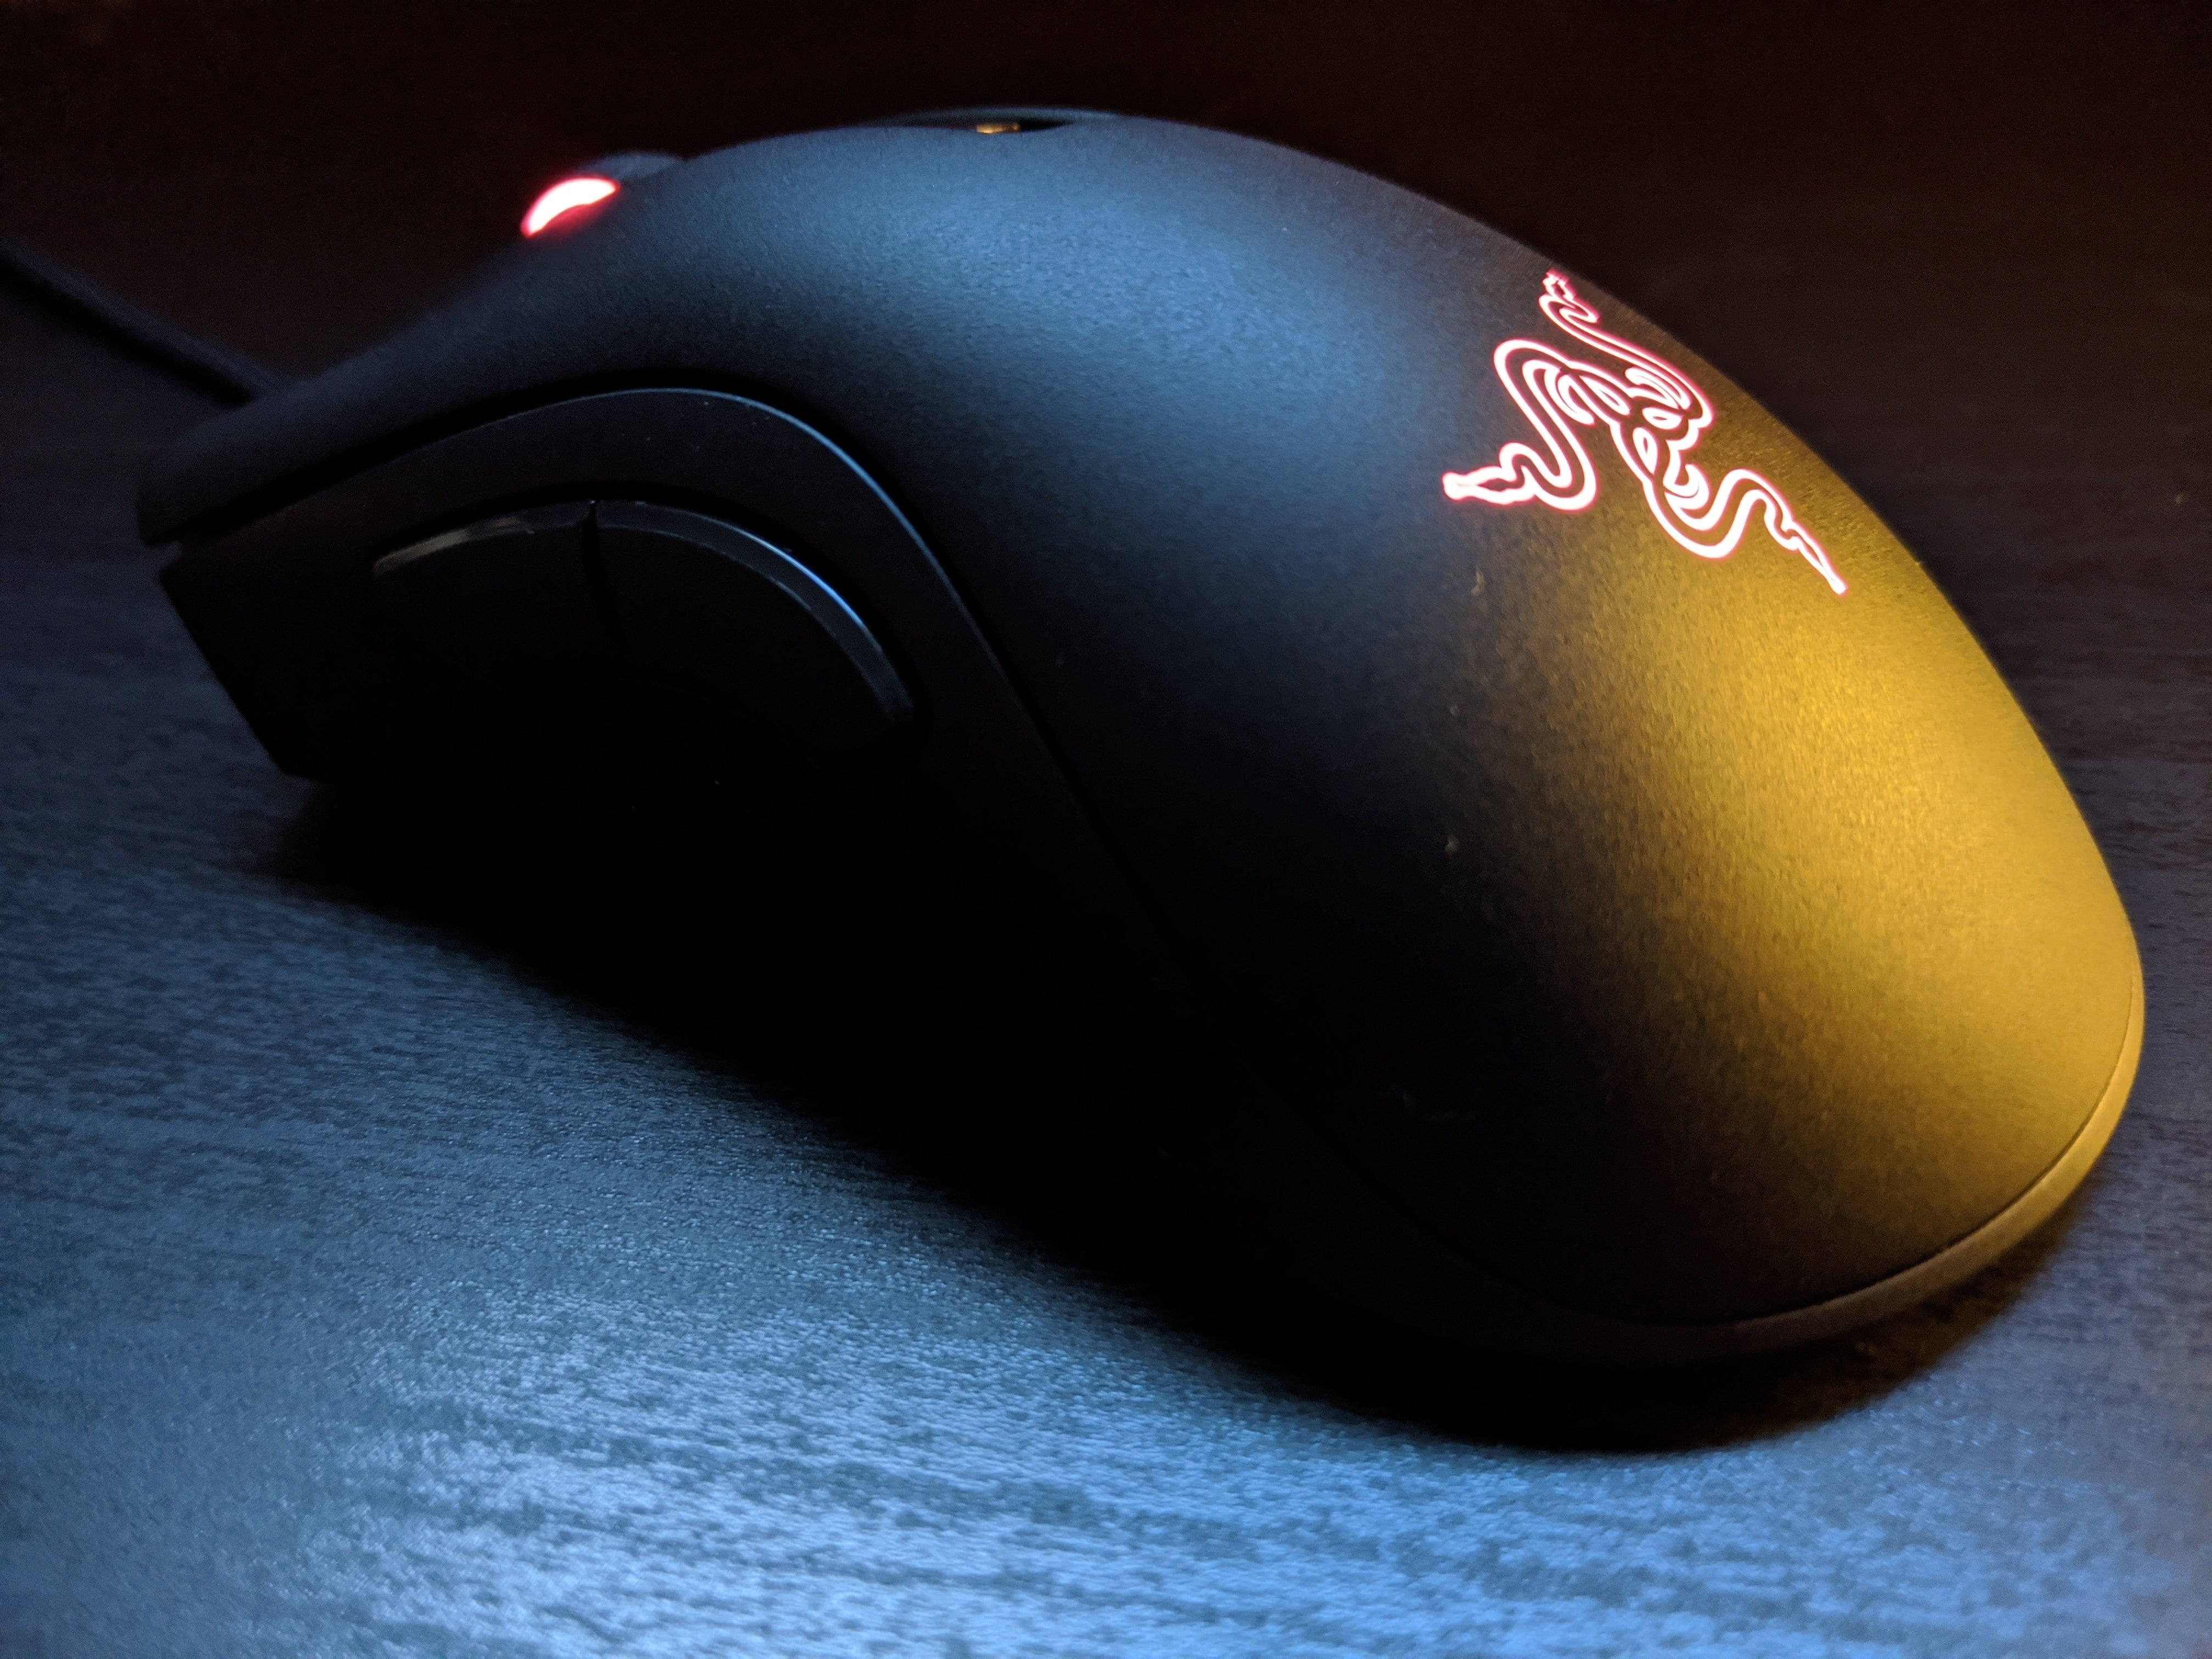 Razer DeathAdder V2 review: We like the upgrades, but what's with the